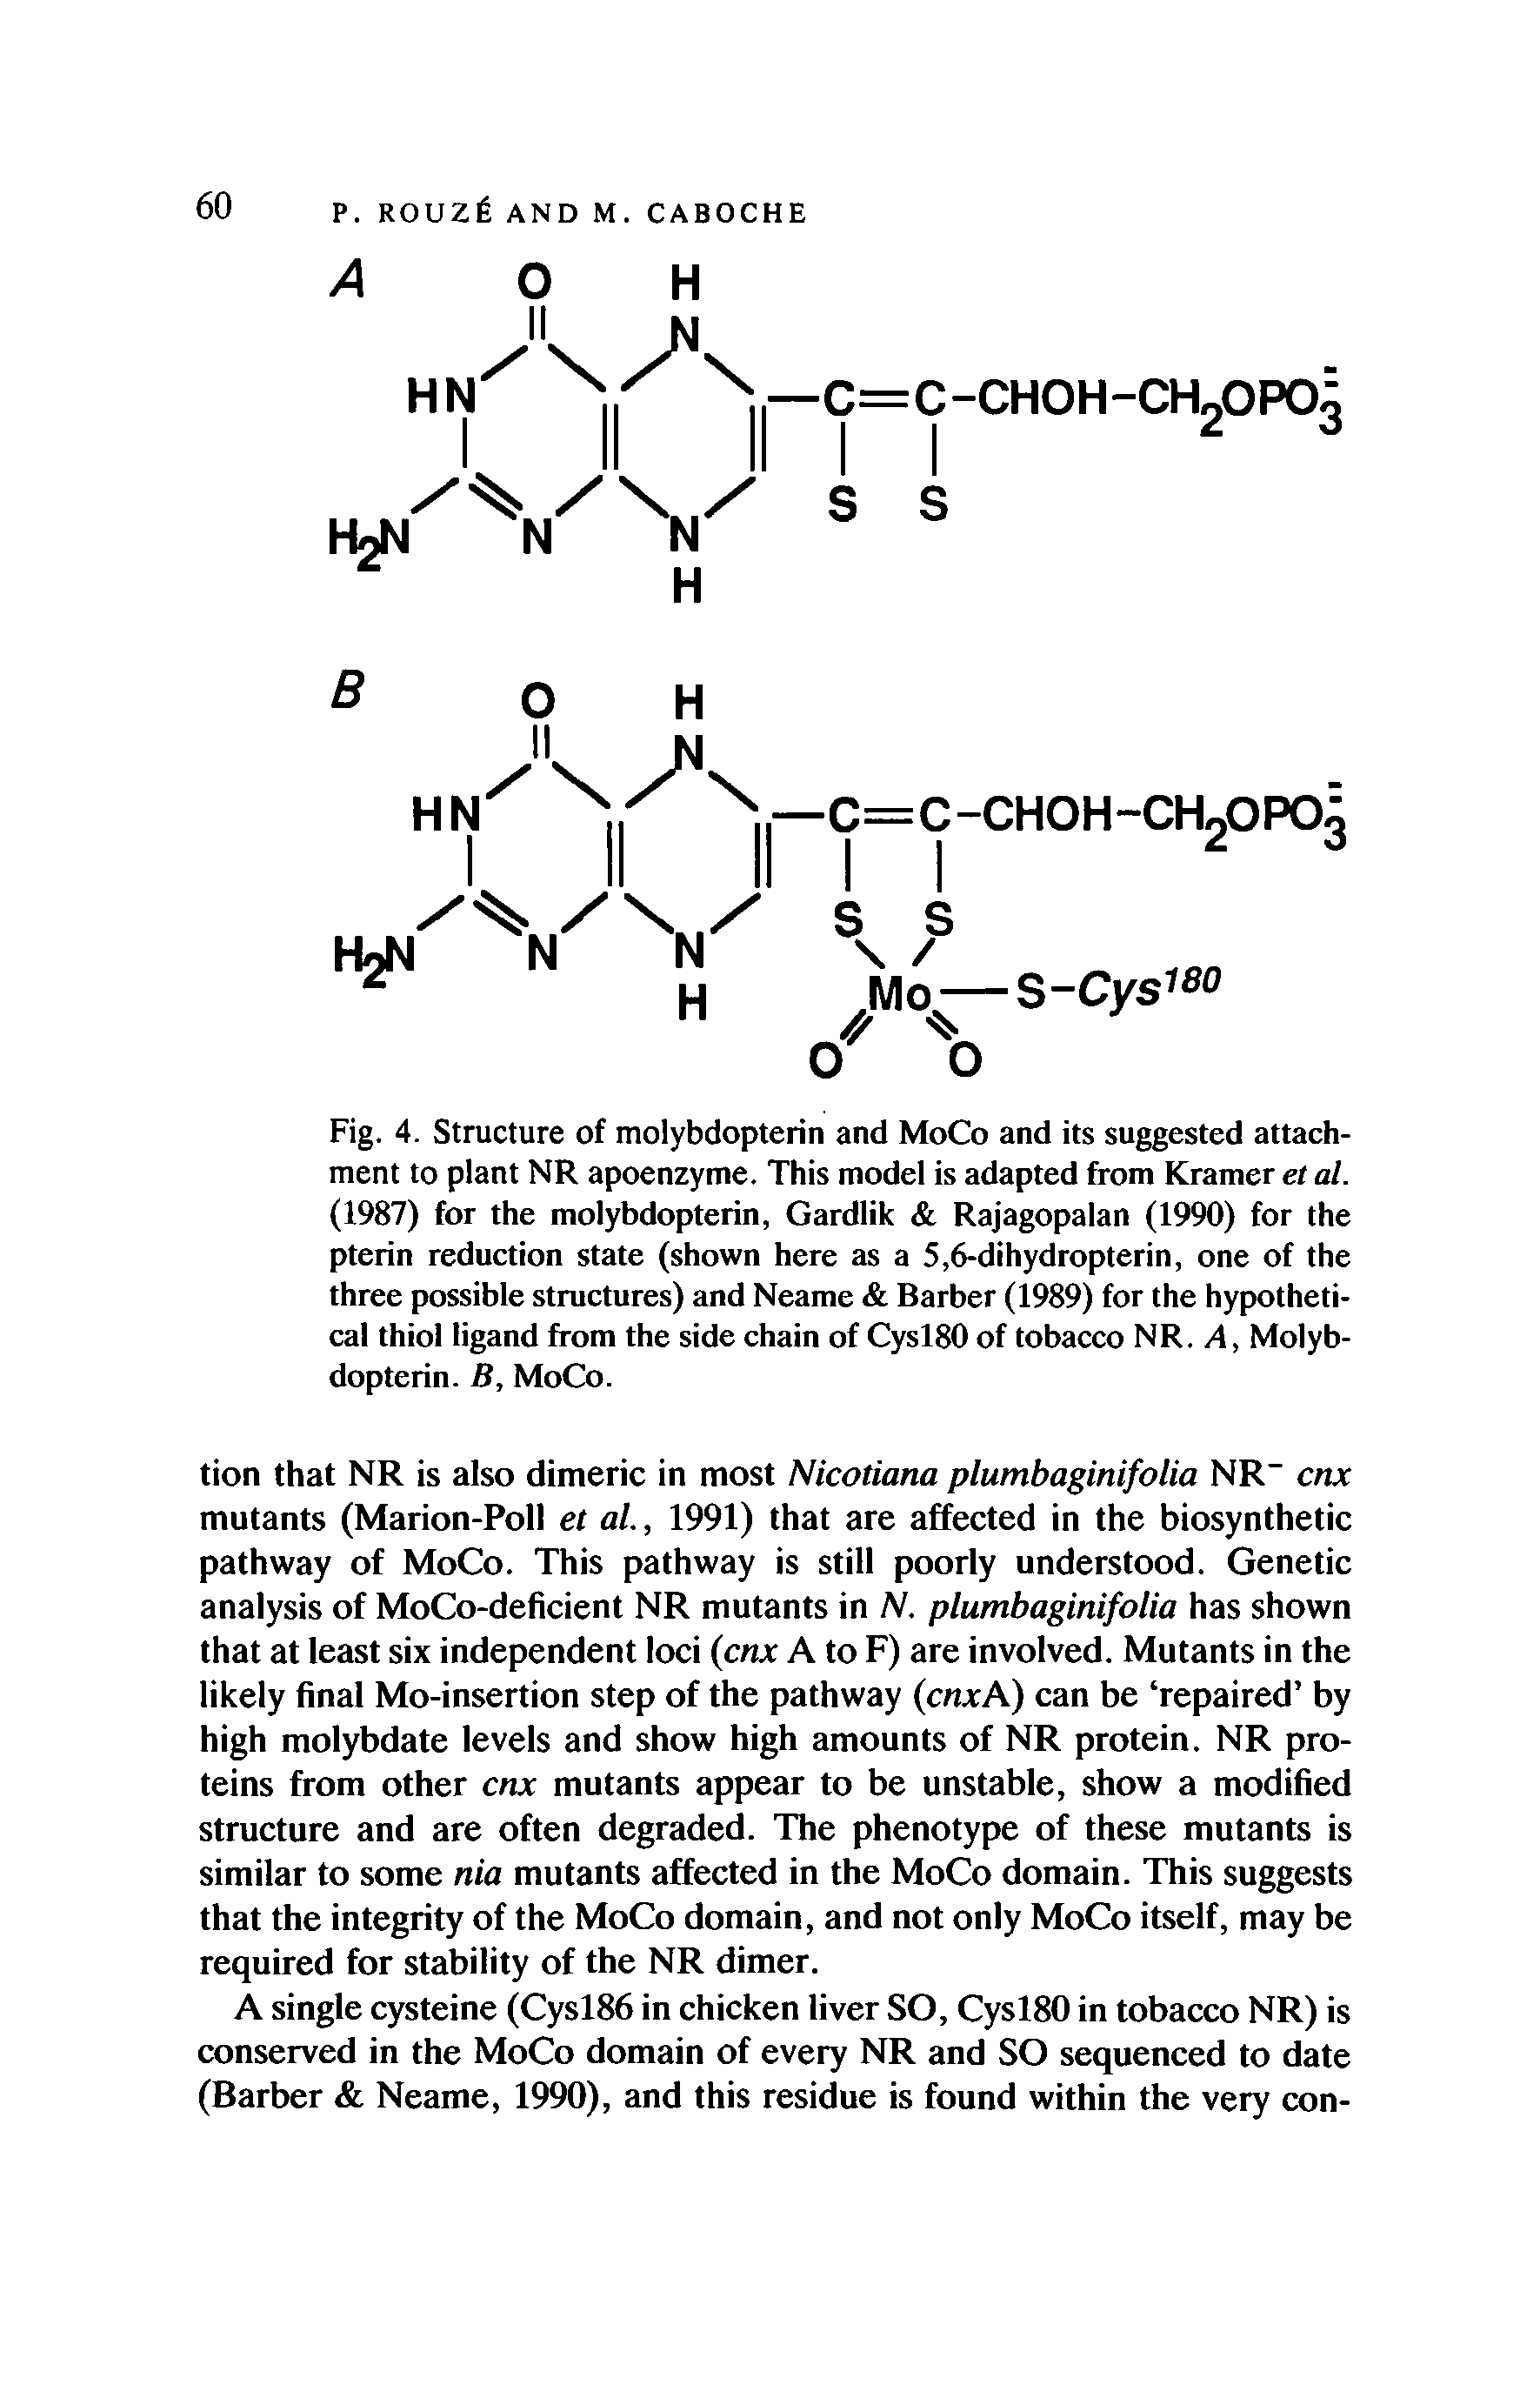 Fig. 4. Structure of molybdopterin and MoCo and its suggested attachment to plant NR apoenzyme. This model is adapted from Kramer et al. (1987) for the molybdopterin, Gardlik Rajagopalan (1990) for the pterin reduction state (shown here as a 5,6-dihydropterin, one of the three possible structures) and Neame Barber (1989) for the hypothetical thiol ligand from the side chain of Cysl80 of tobacco NR. A, Molybdopterin. B, MoCo.